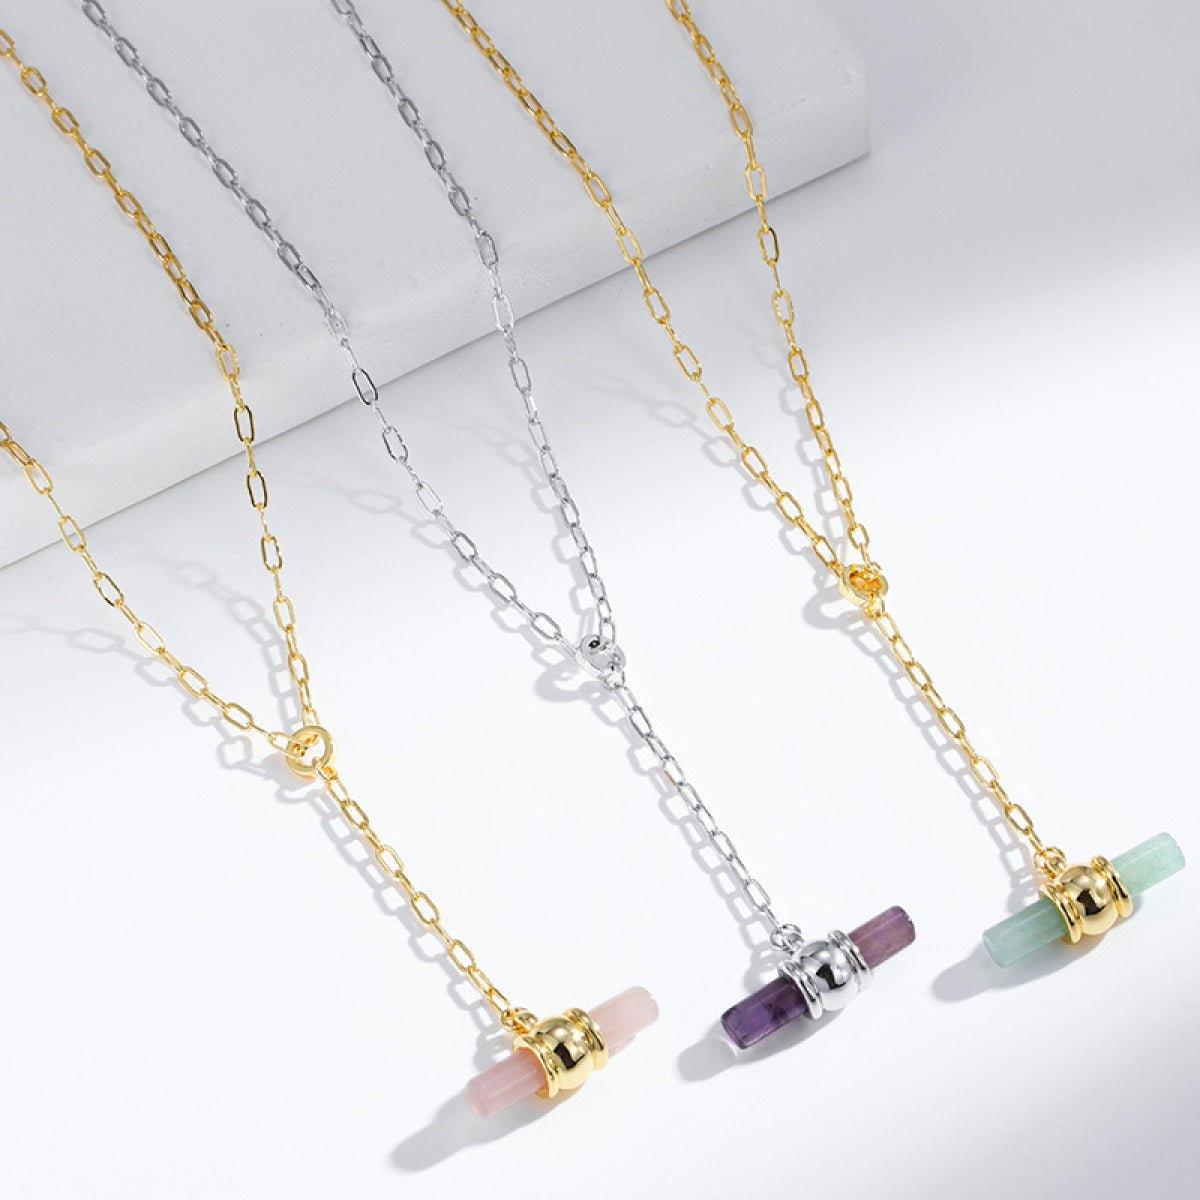 Gold-Plated Y-Shaped Inlaid Stone Pendants Necklace